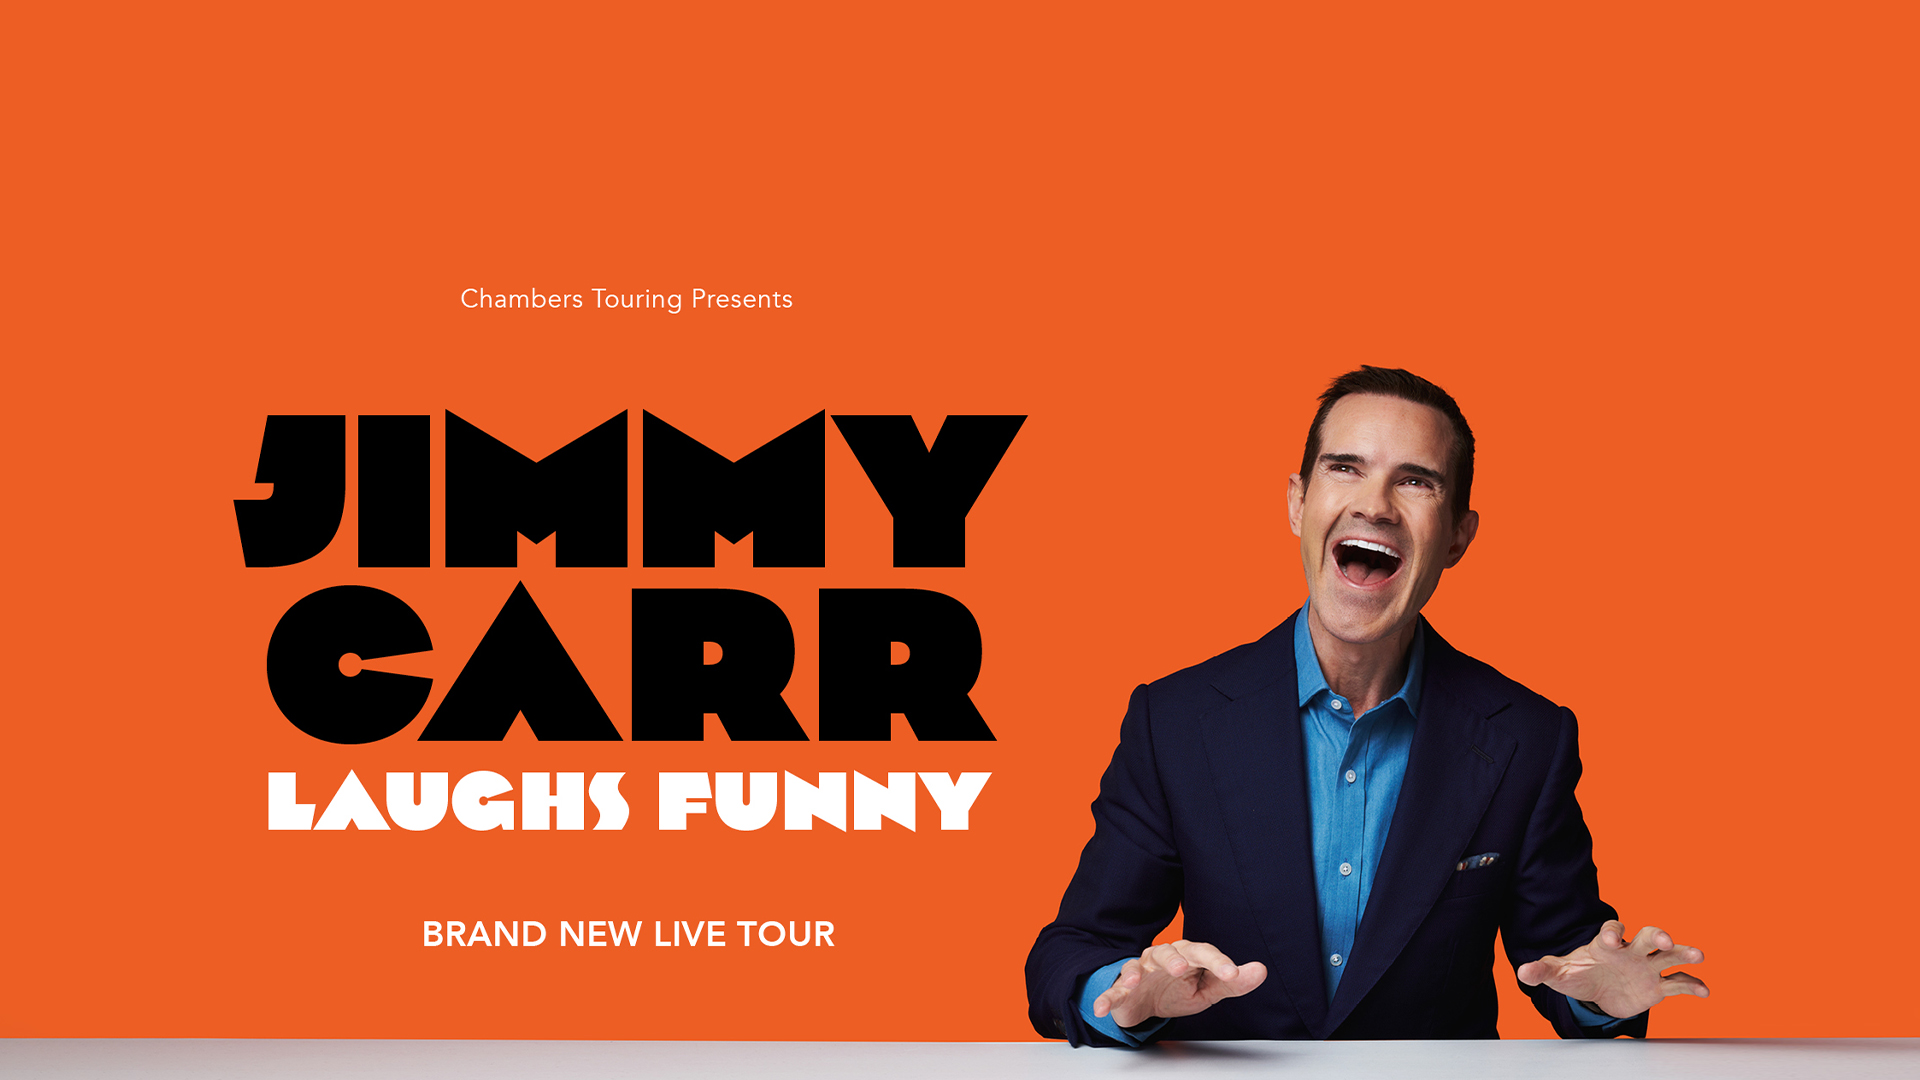 Chambers Touring Presents JIMMY CARR: LAUGHS FUNNY